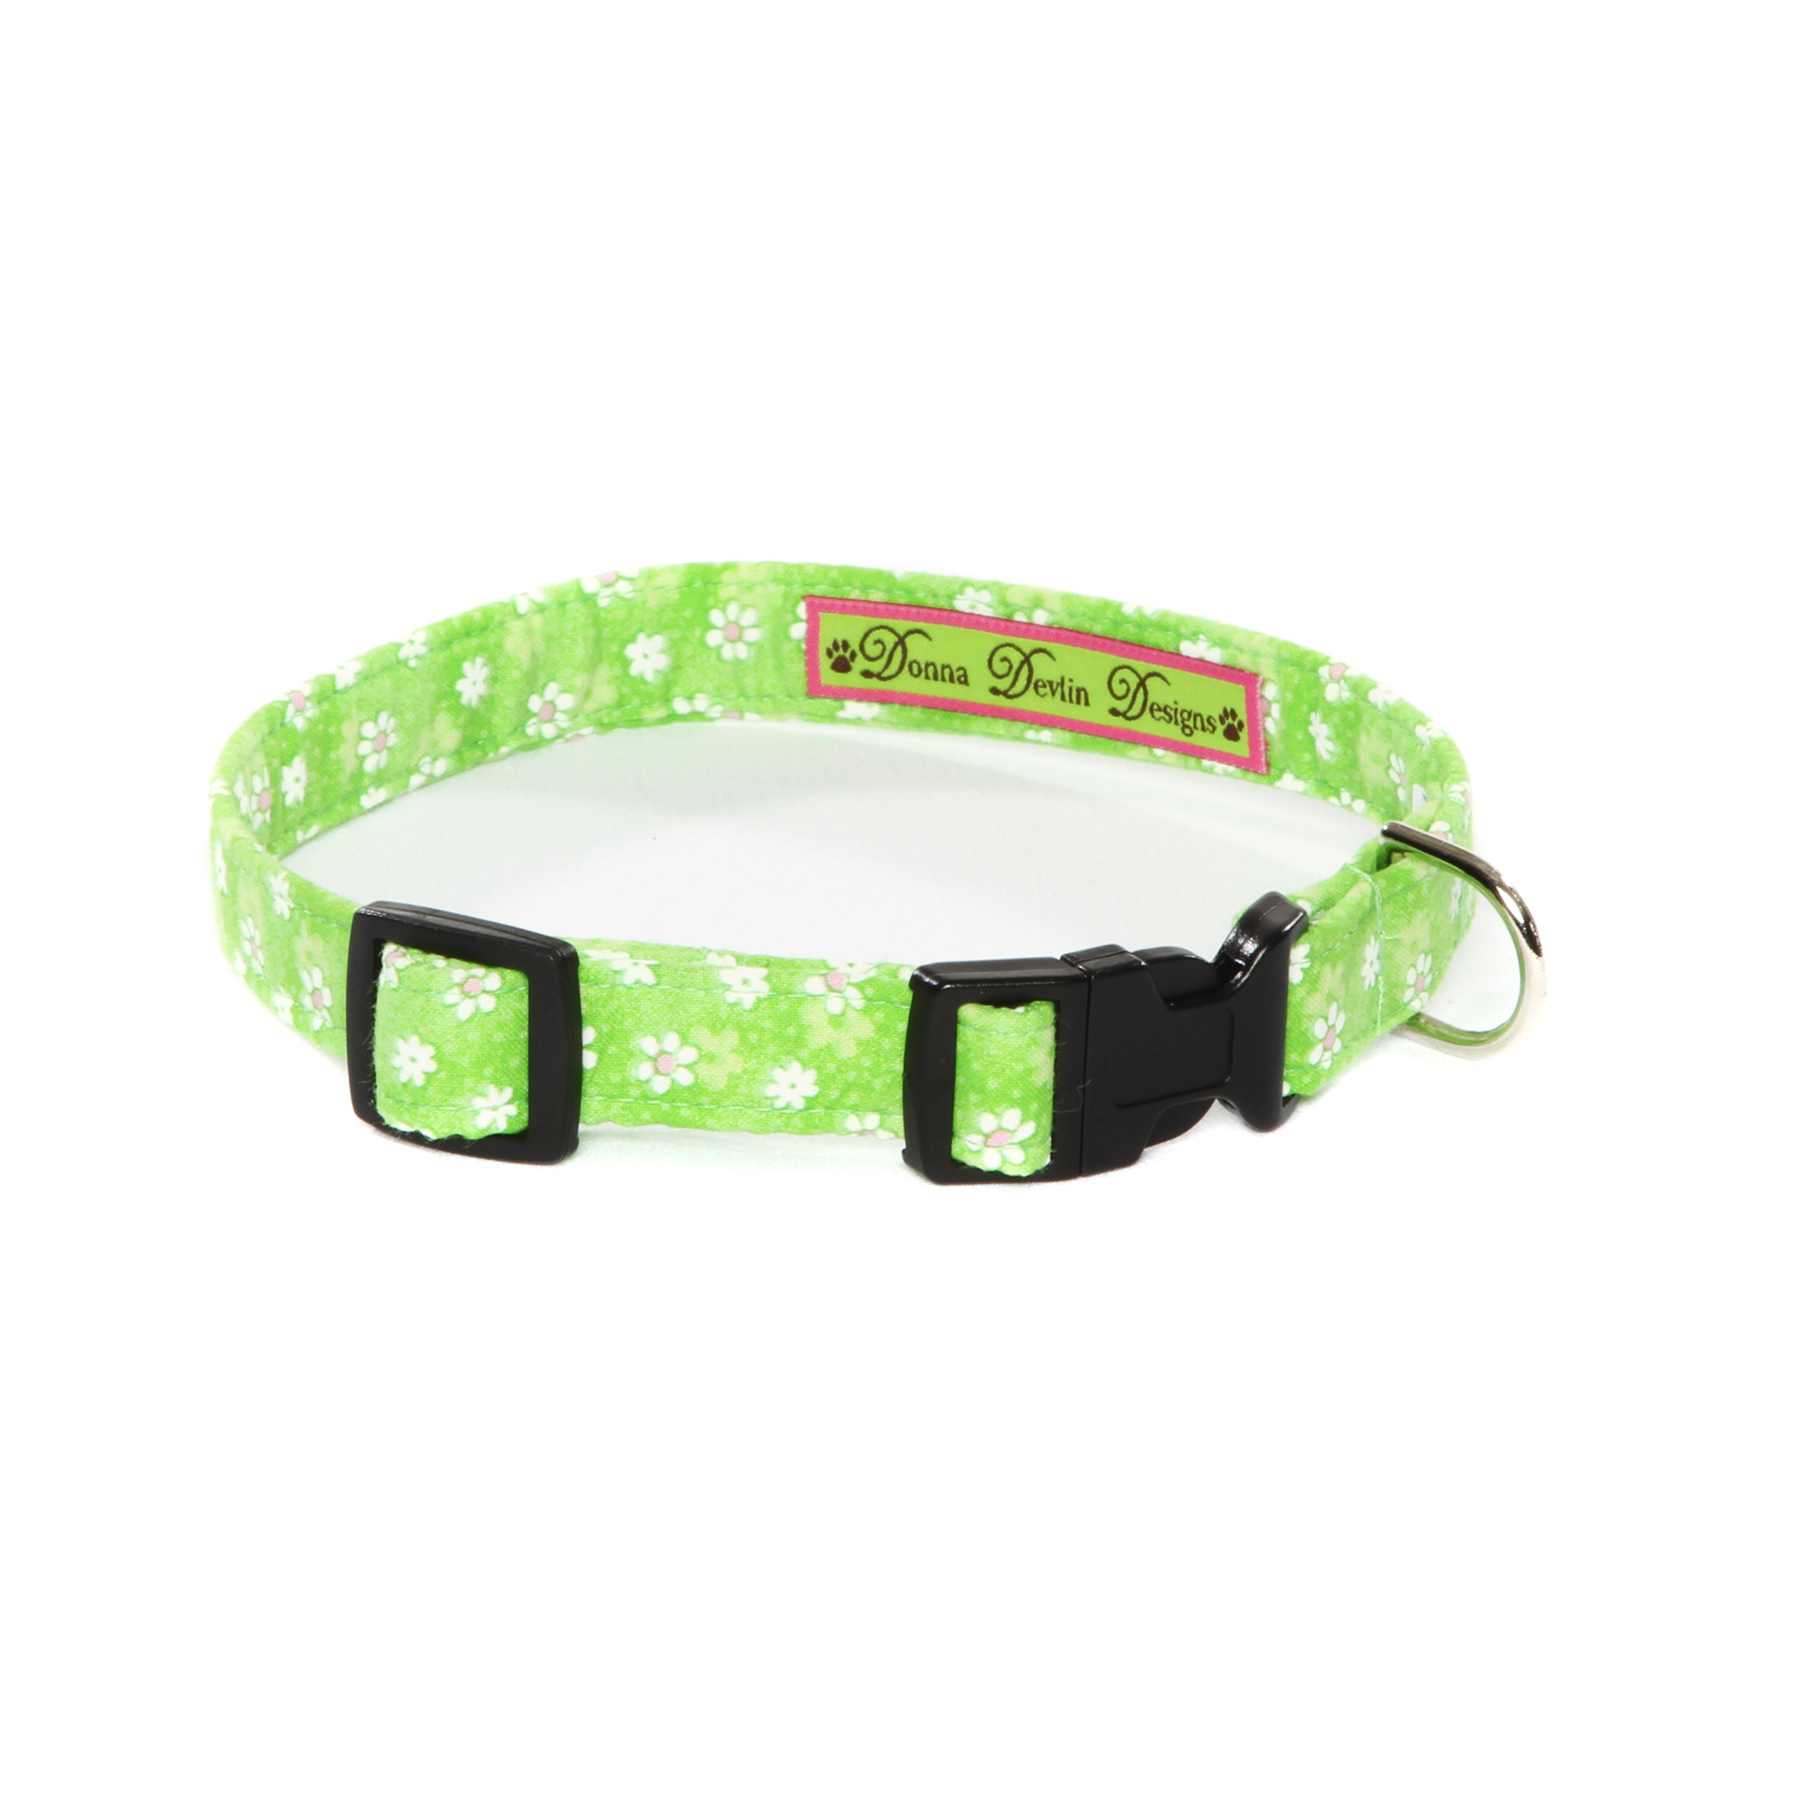 Daisy Do Collar  Donna Devlin Designs Tracheal Trauma Prevention Designer  Dog Collars, Walking Vests, Step In Harness and Leash and Complete Designer  Sets For Your Pampered Pets